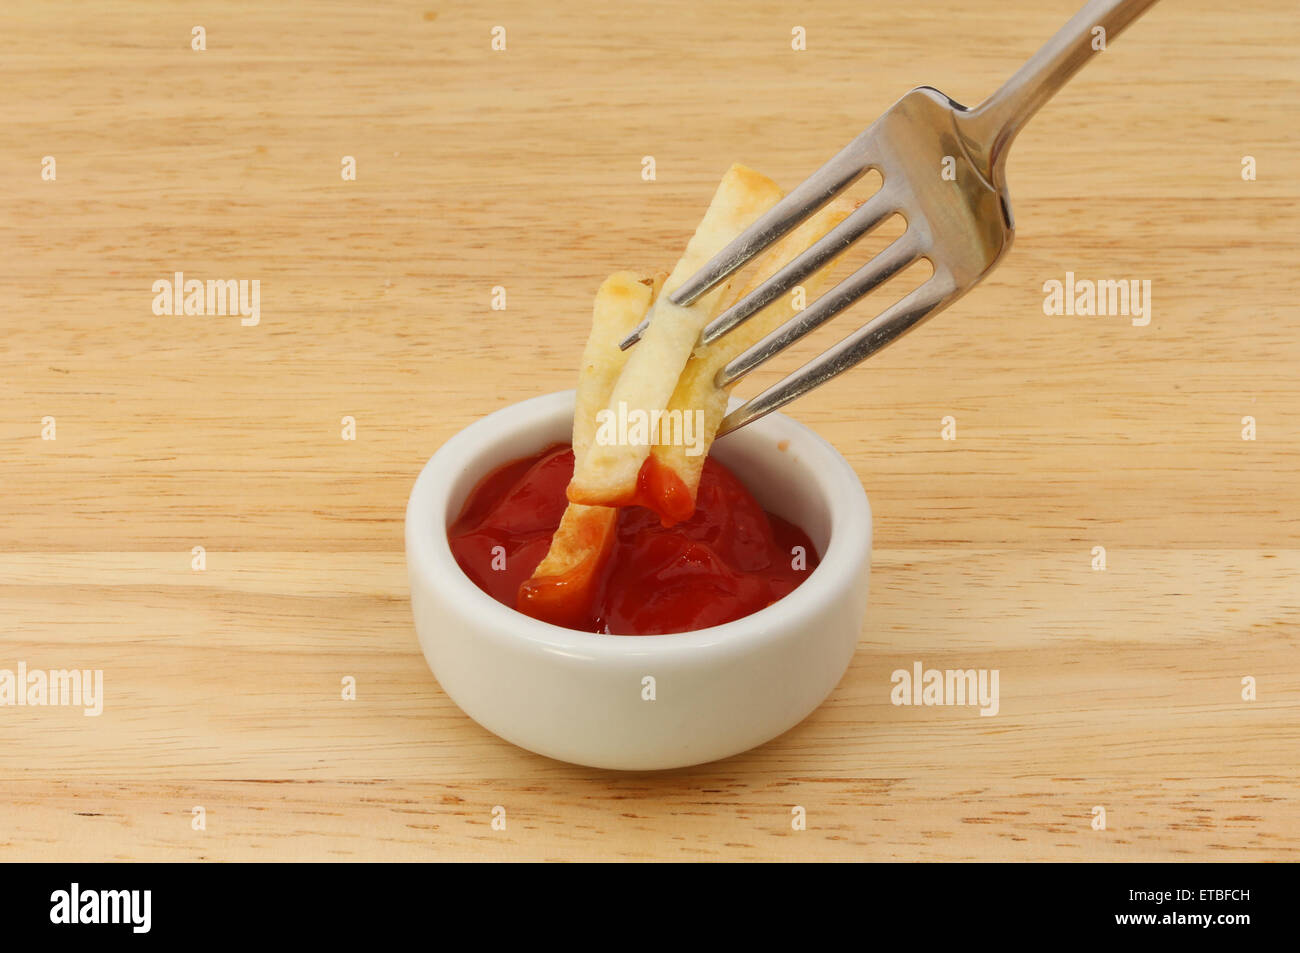 French fries on a fork dipping in tomato ketchup on a wooden board Stock Photo